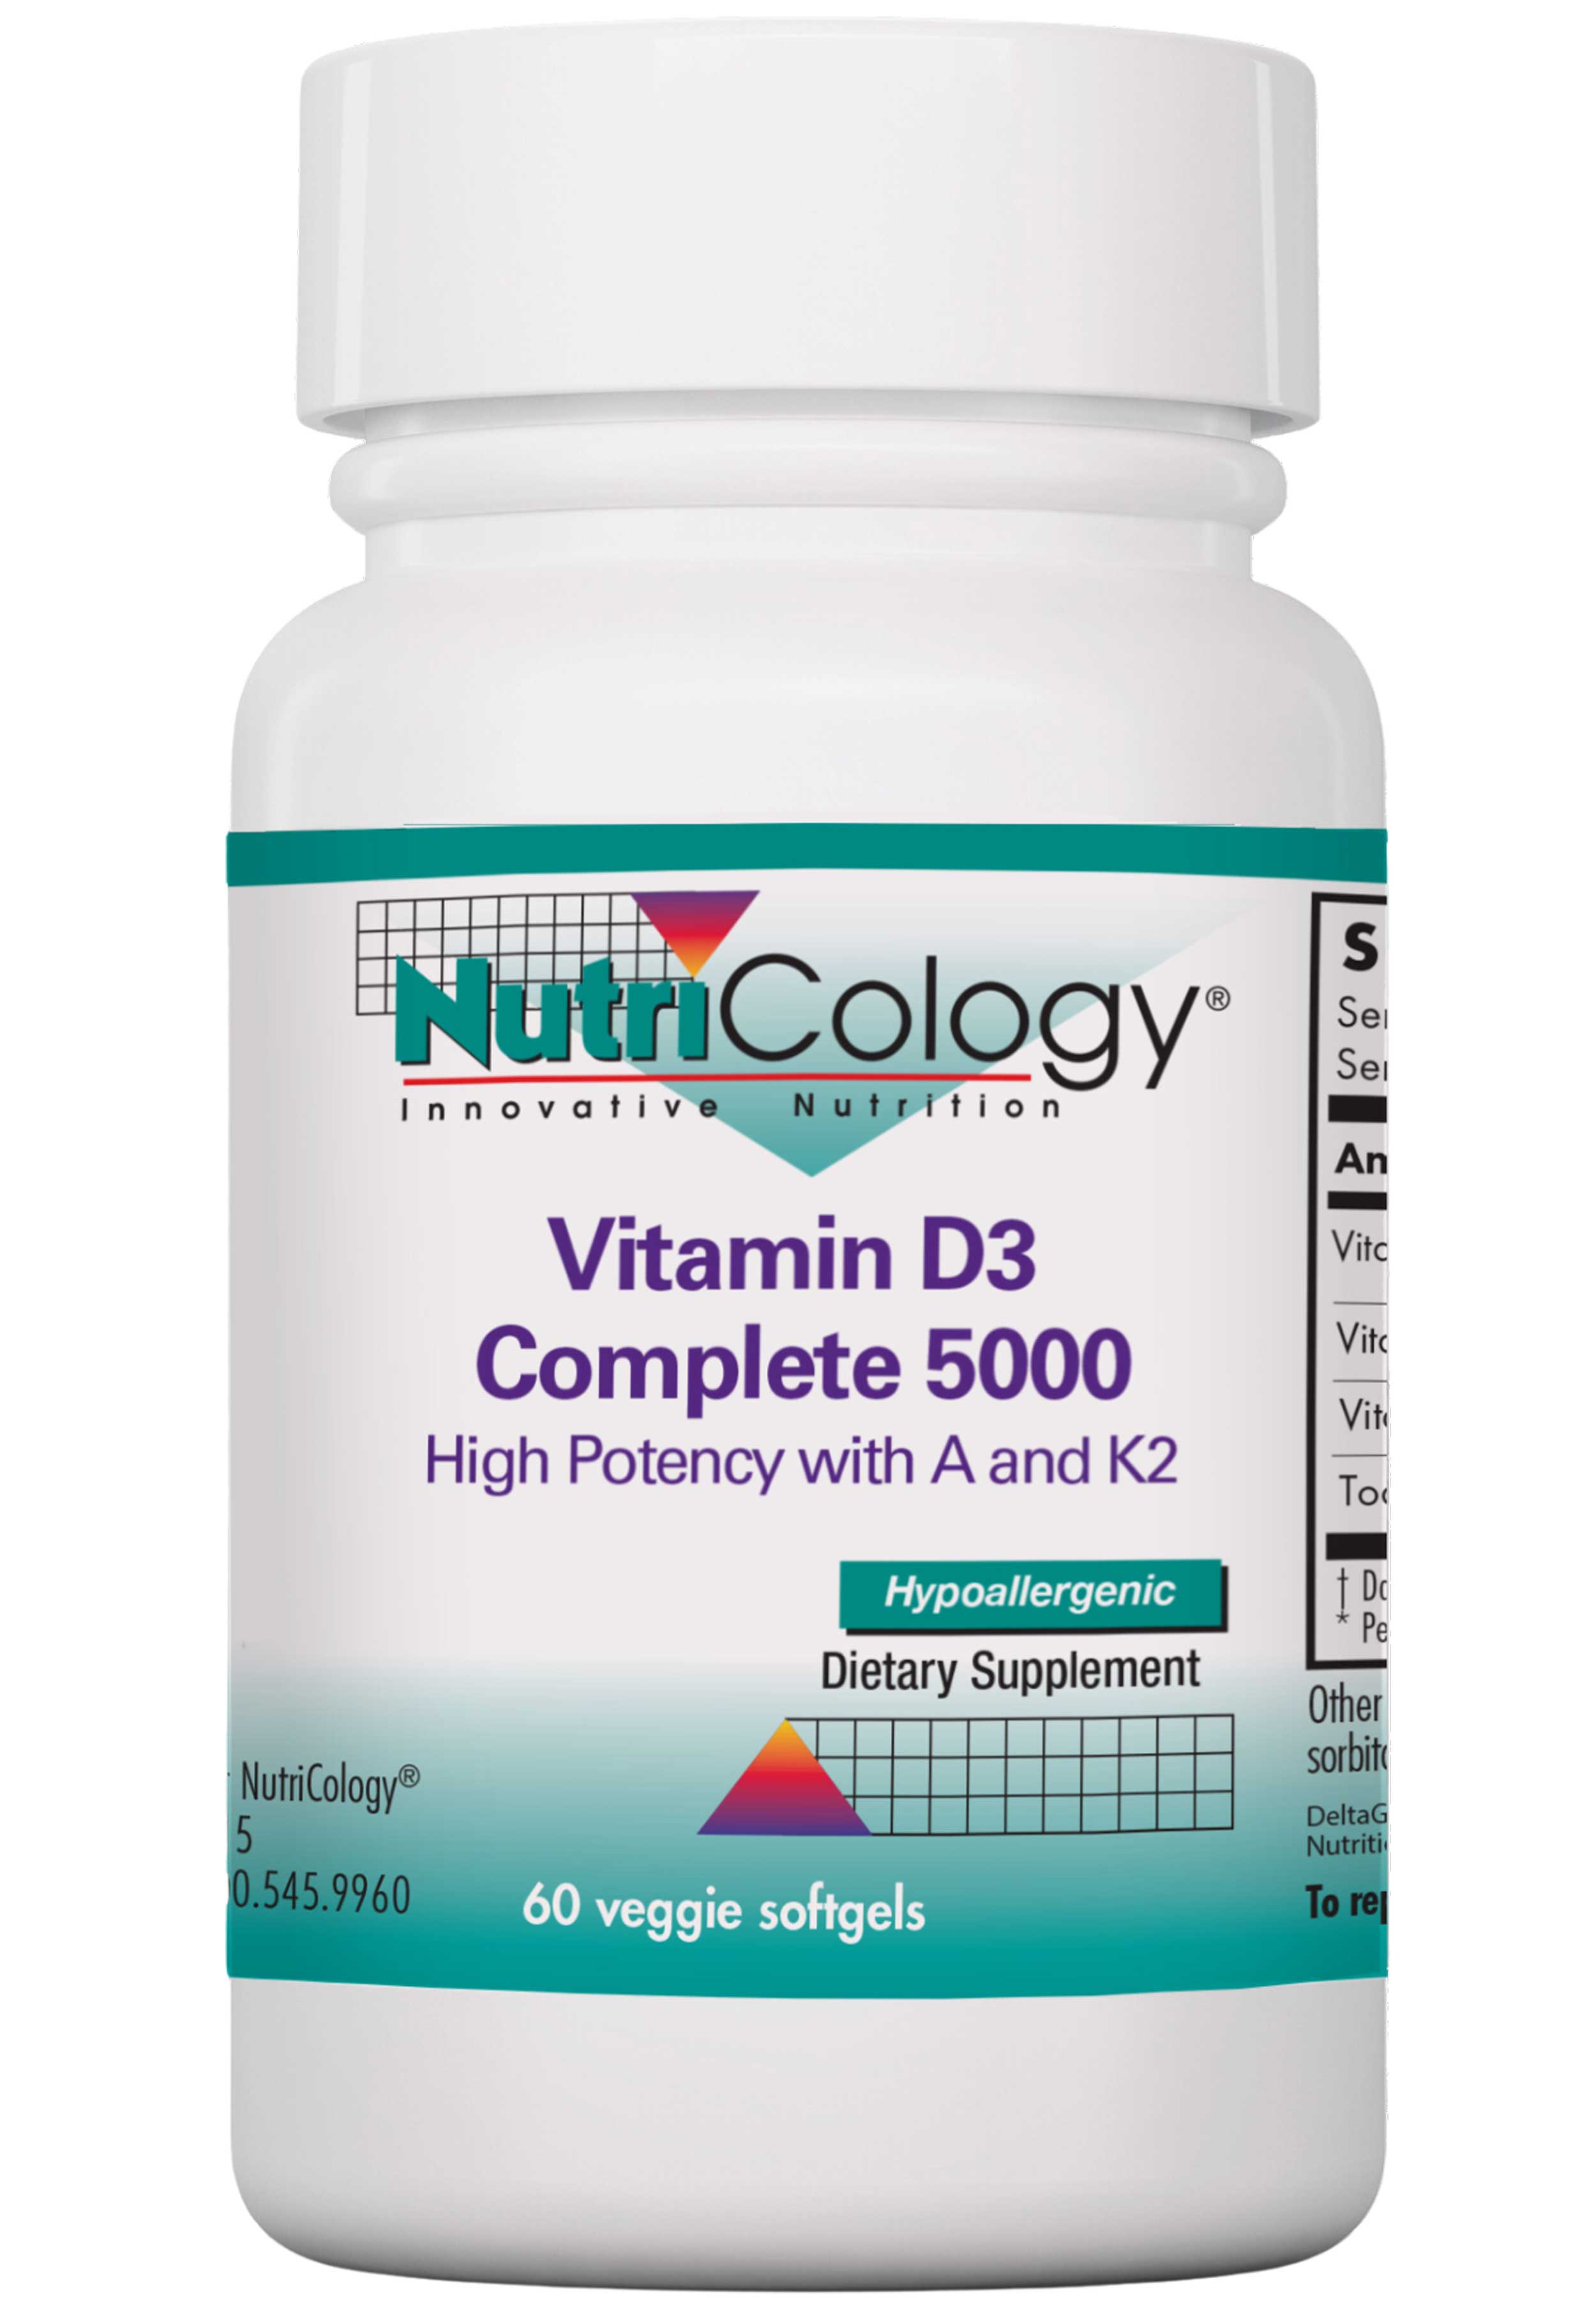 Nutricology Vitamin D3 Complete 5000